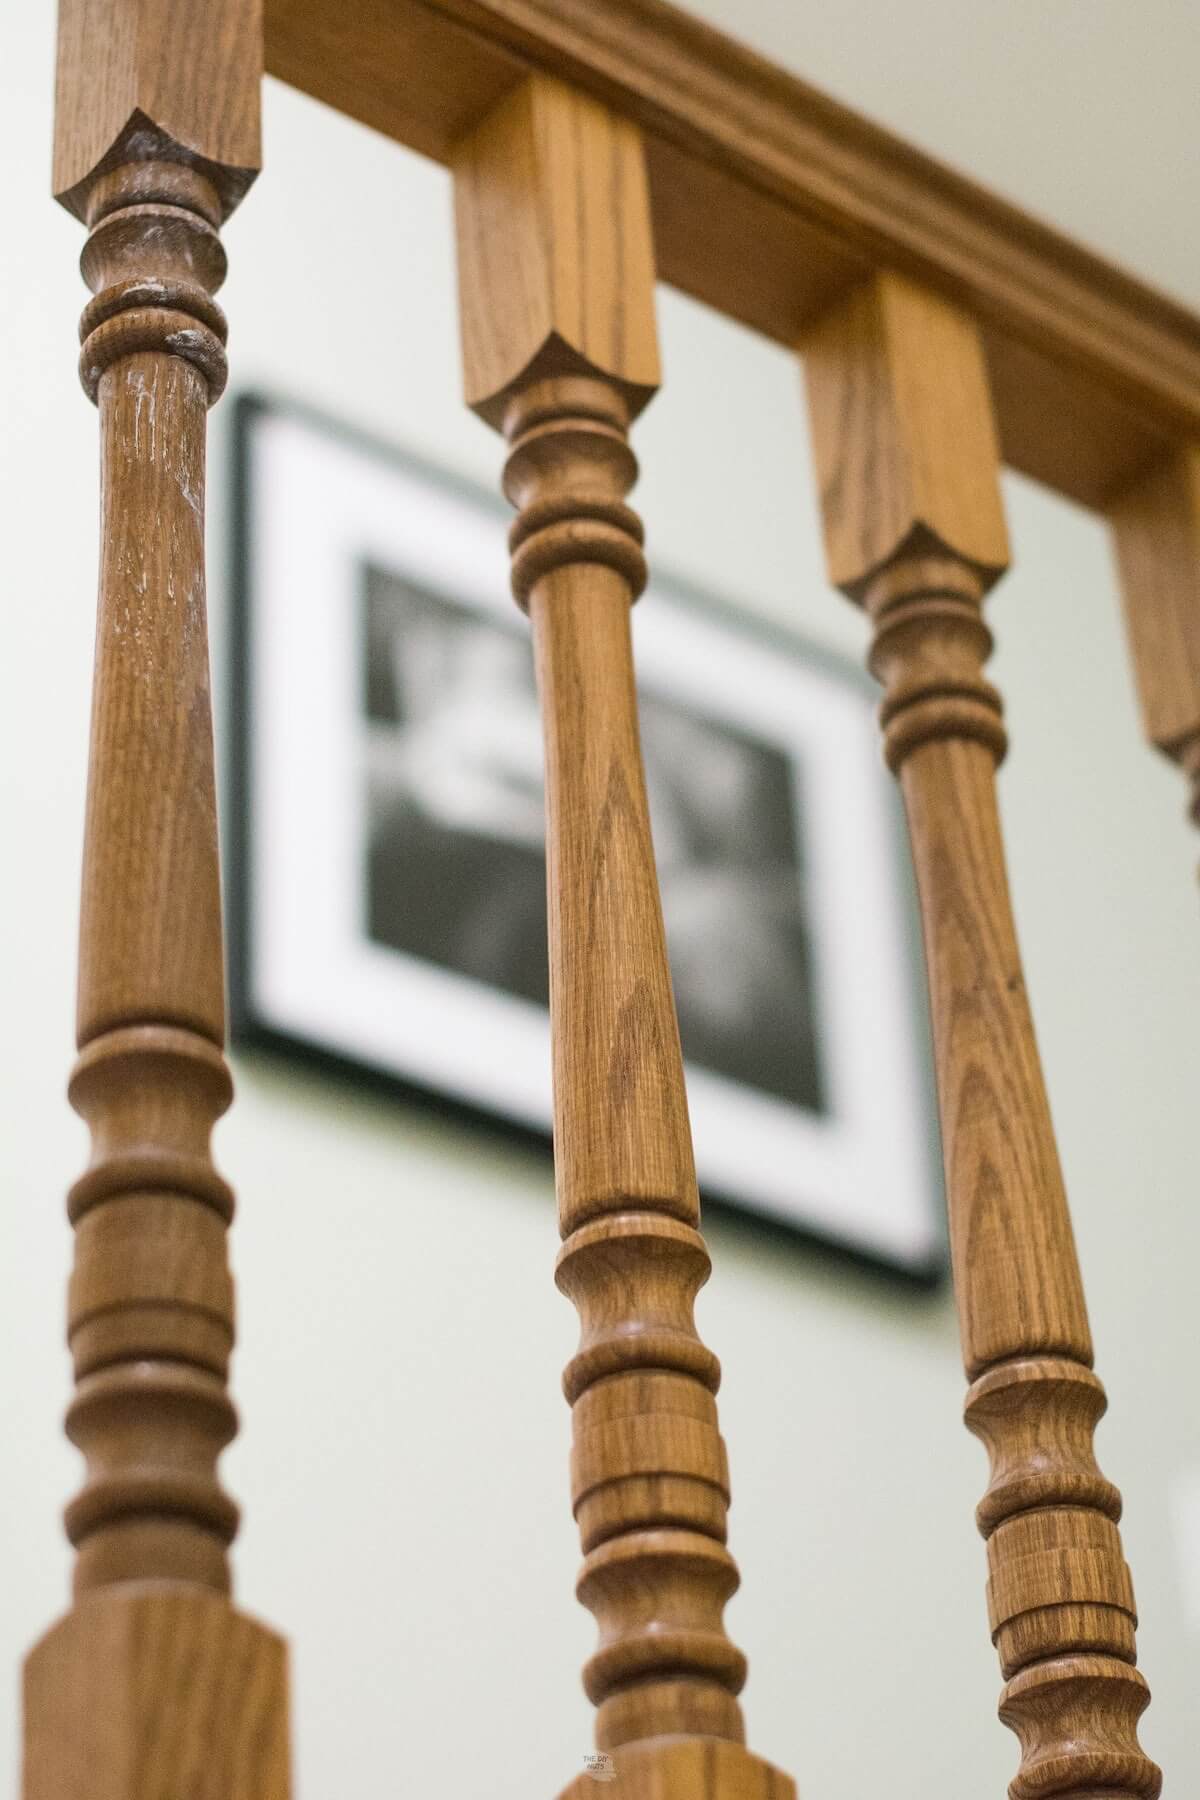 oak stair spindles on stairway banister and railing.